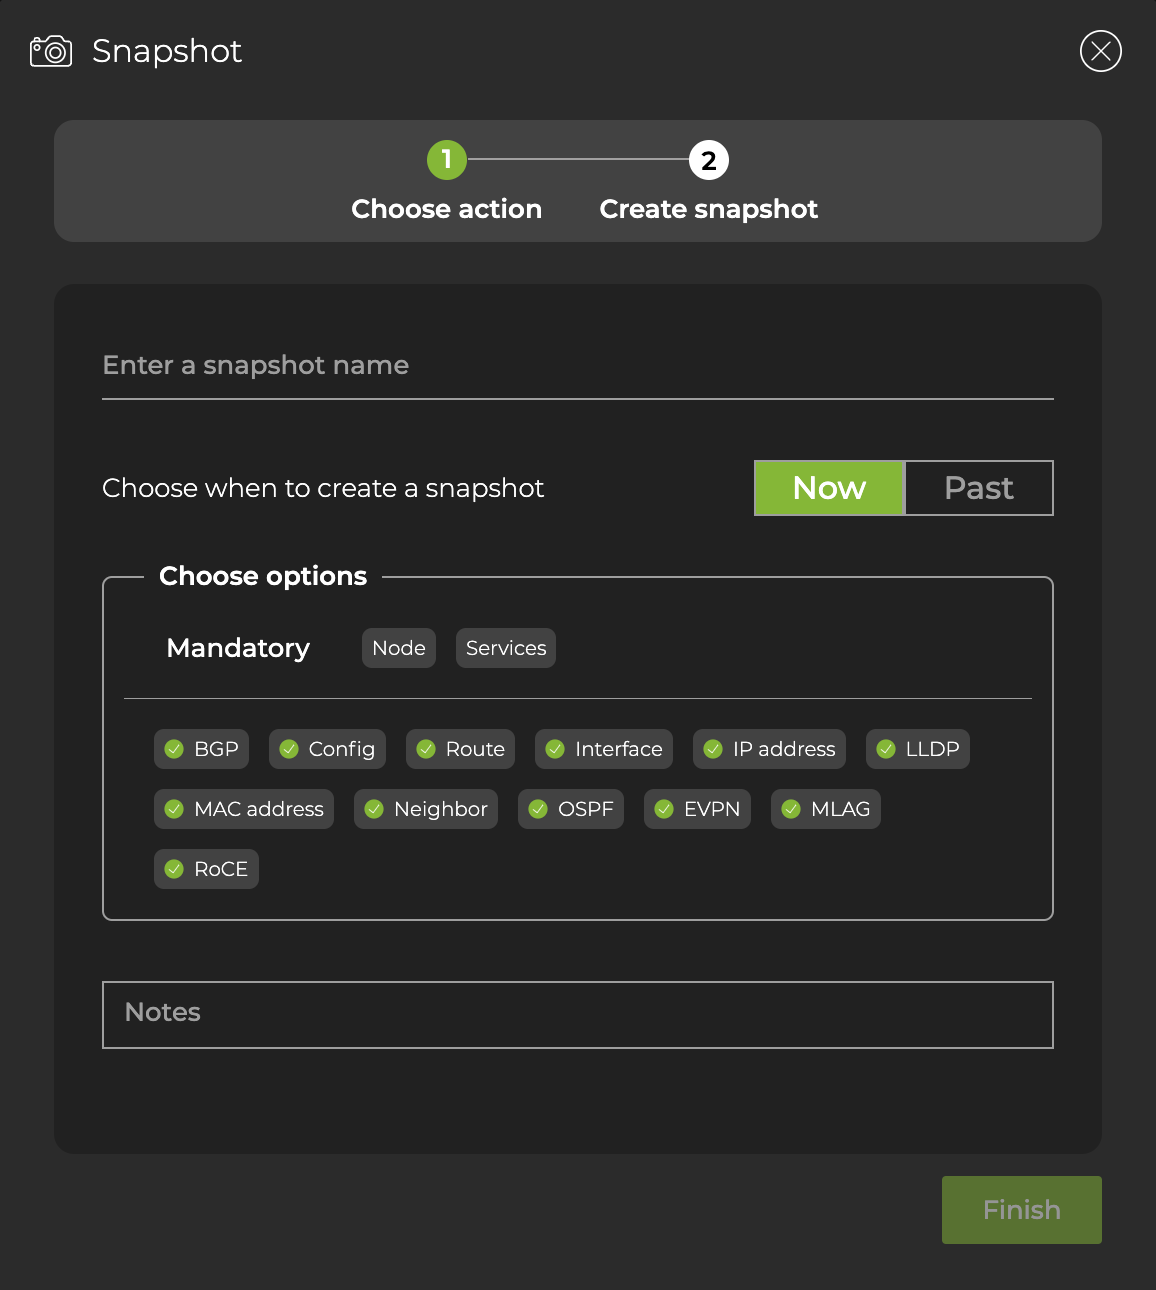 modal prompting user to add name, time frame, and options while creating a snapshot